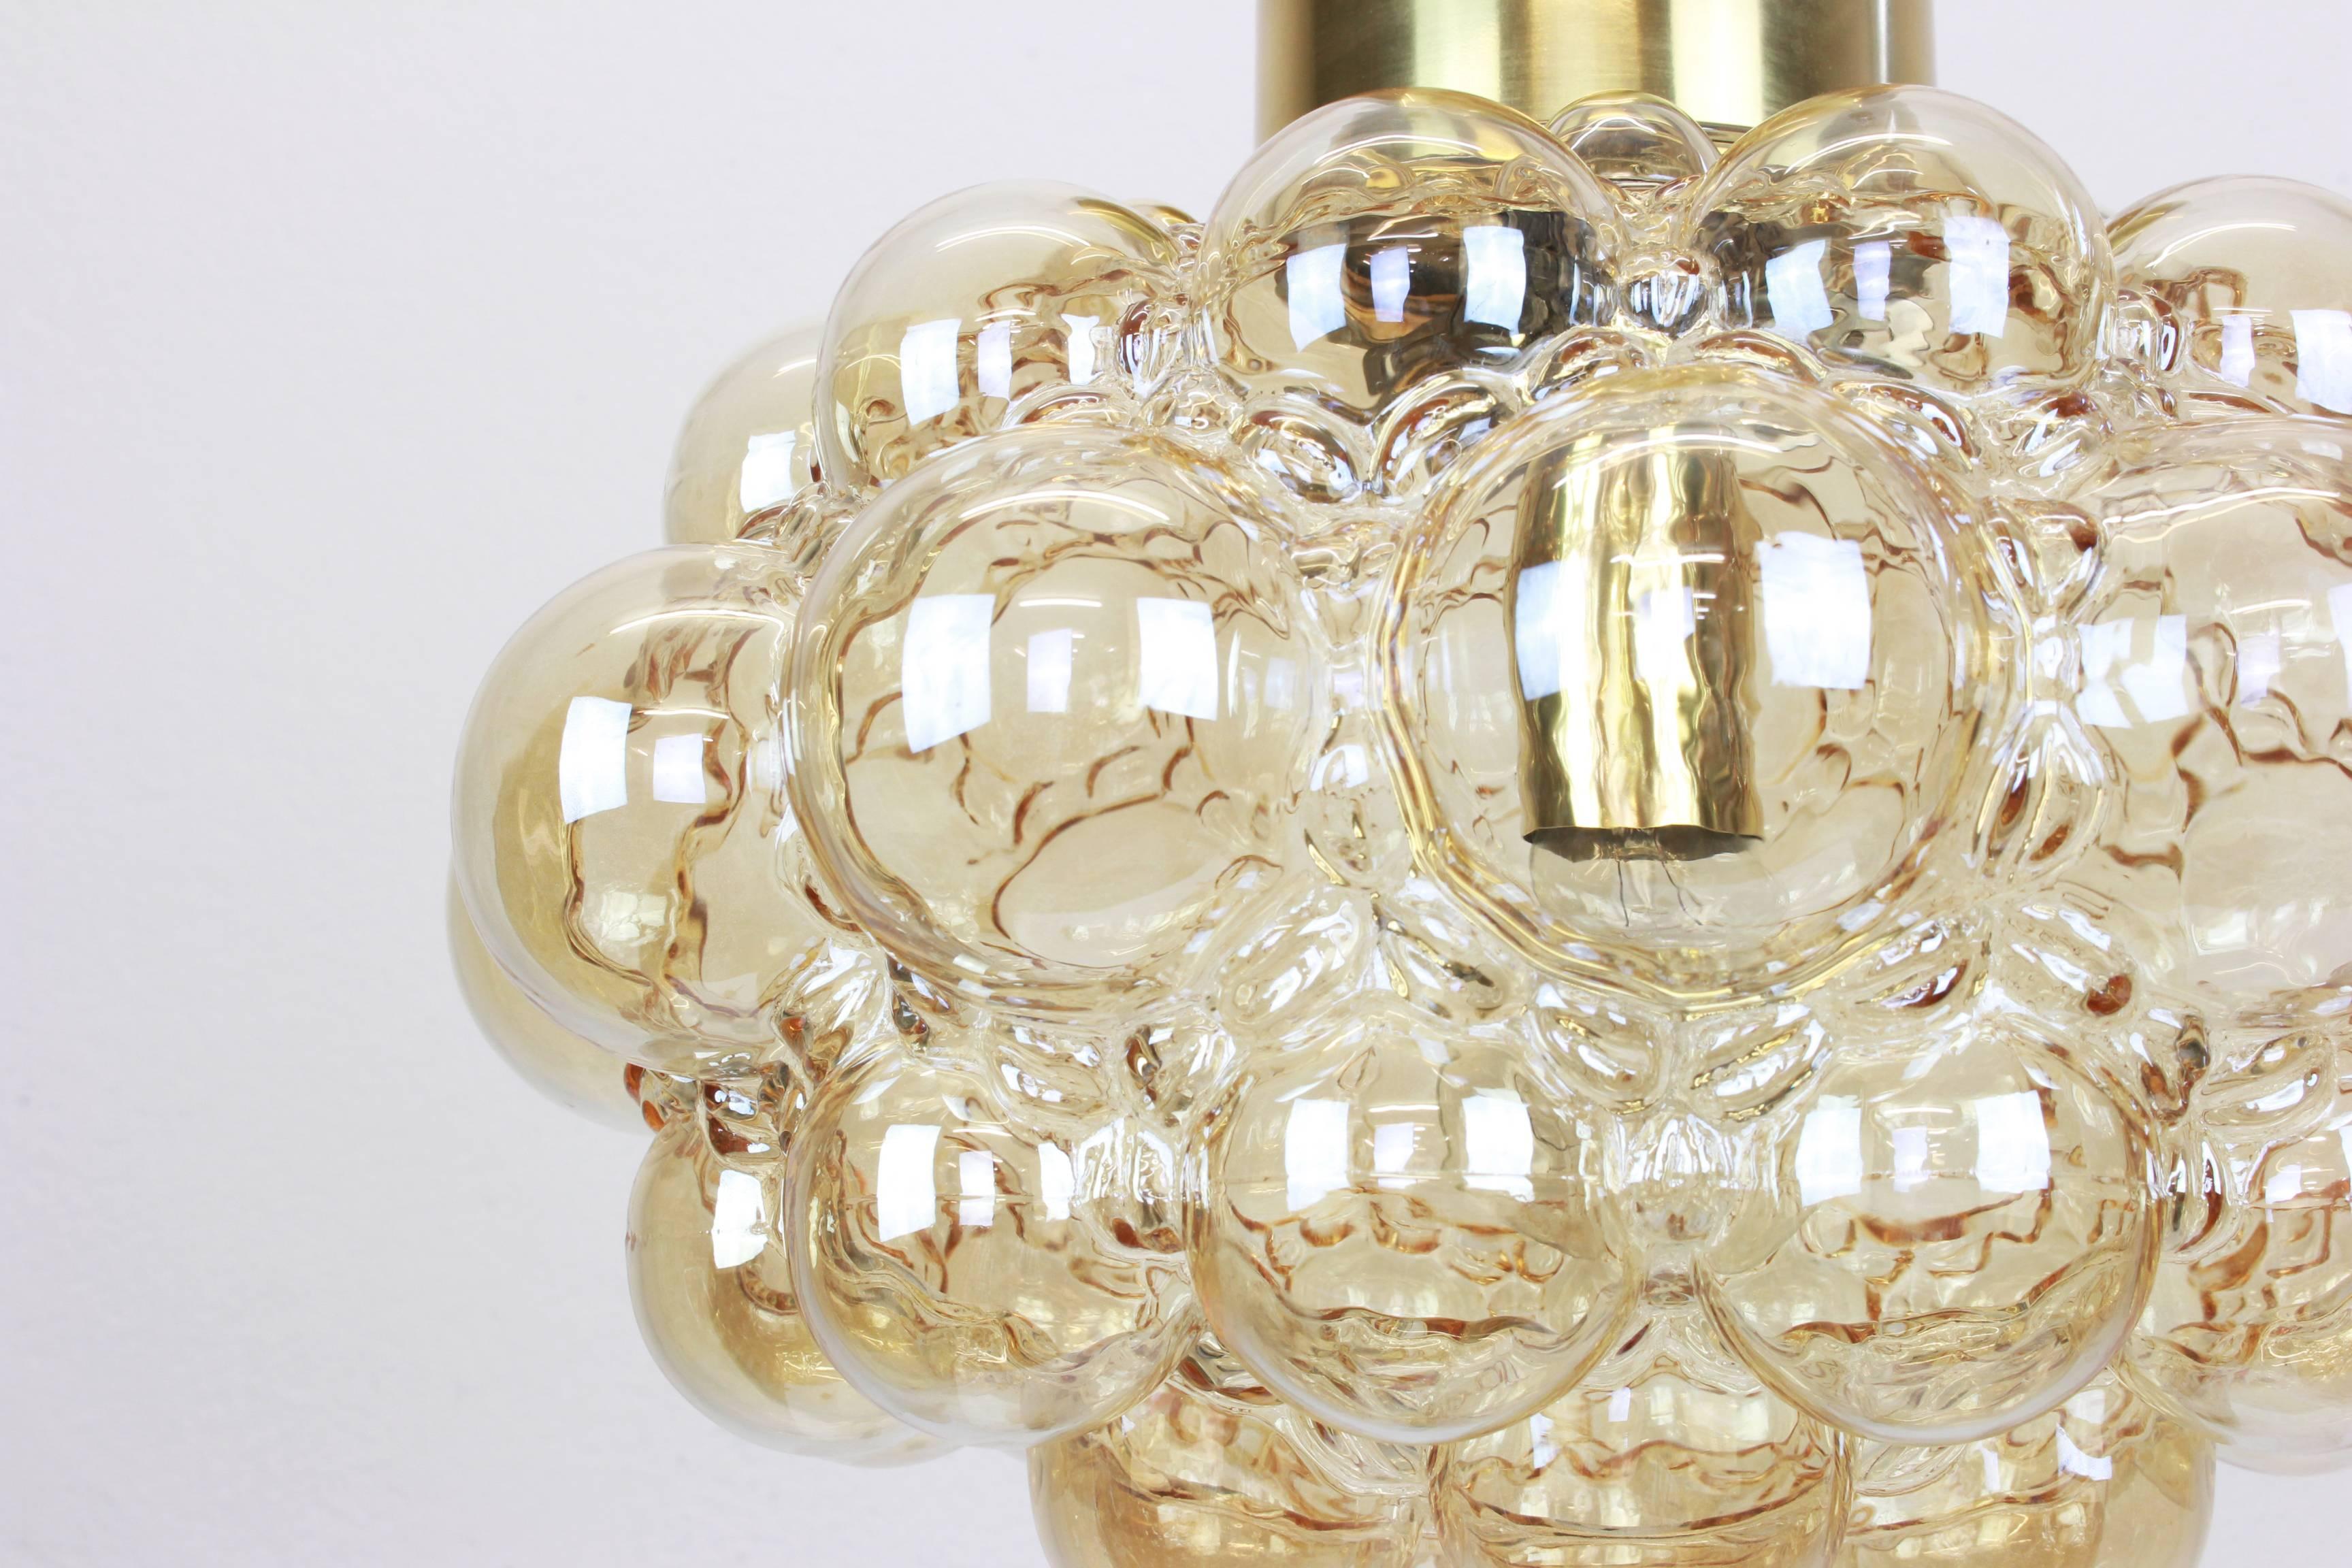 A large round smoke tone bubble glass pendant designed by Helena Tynell for Limburg, manufactured in Germany, circa 1970s.

Sockets: needs 1 x E27 standard bulb with 100W max each.
Light bulbs are not included. It is possible to install this